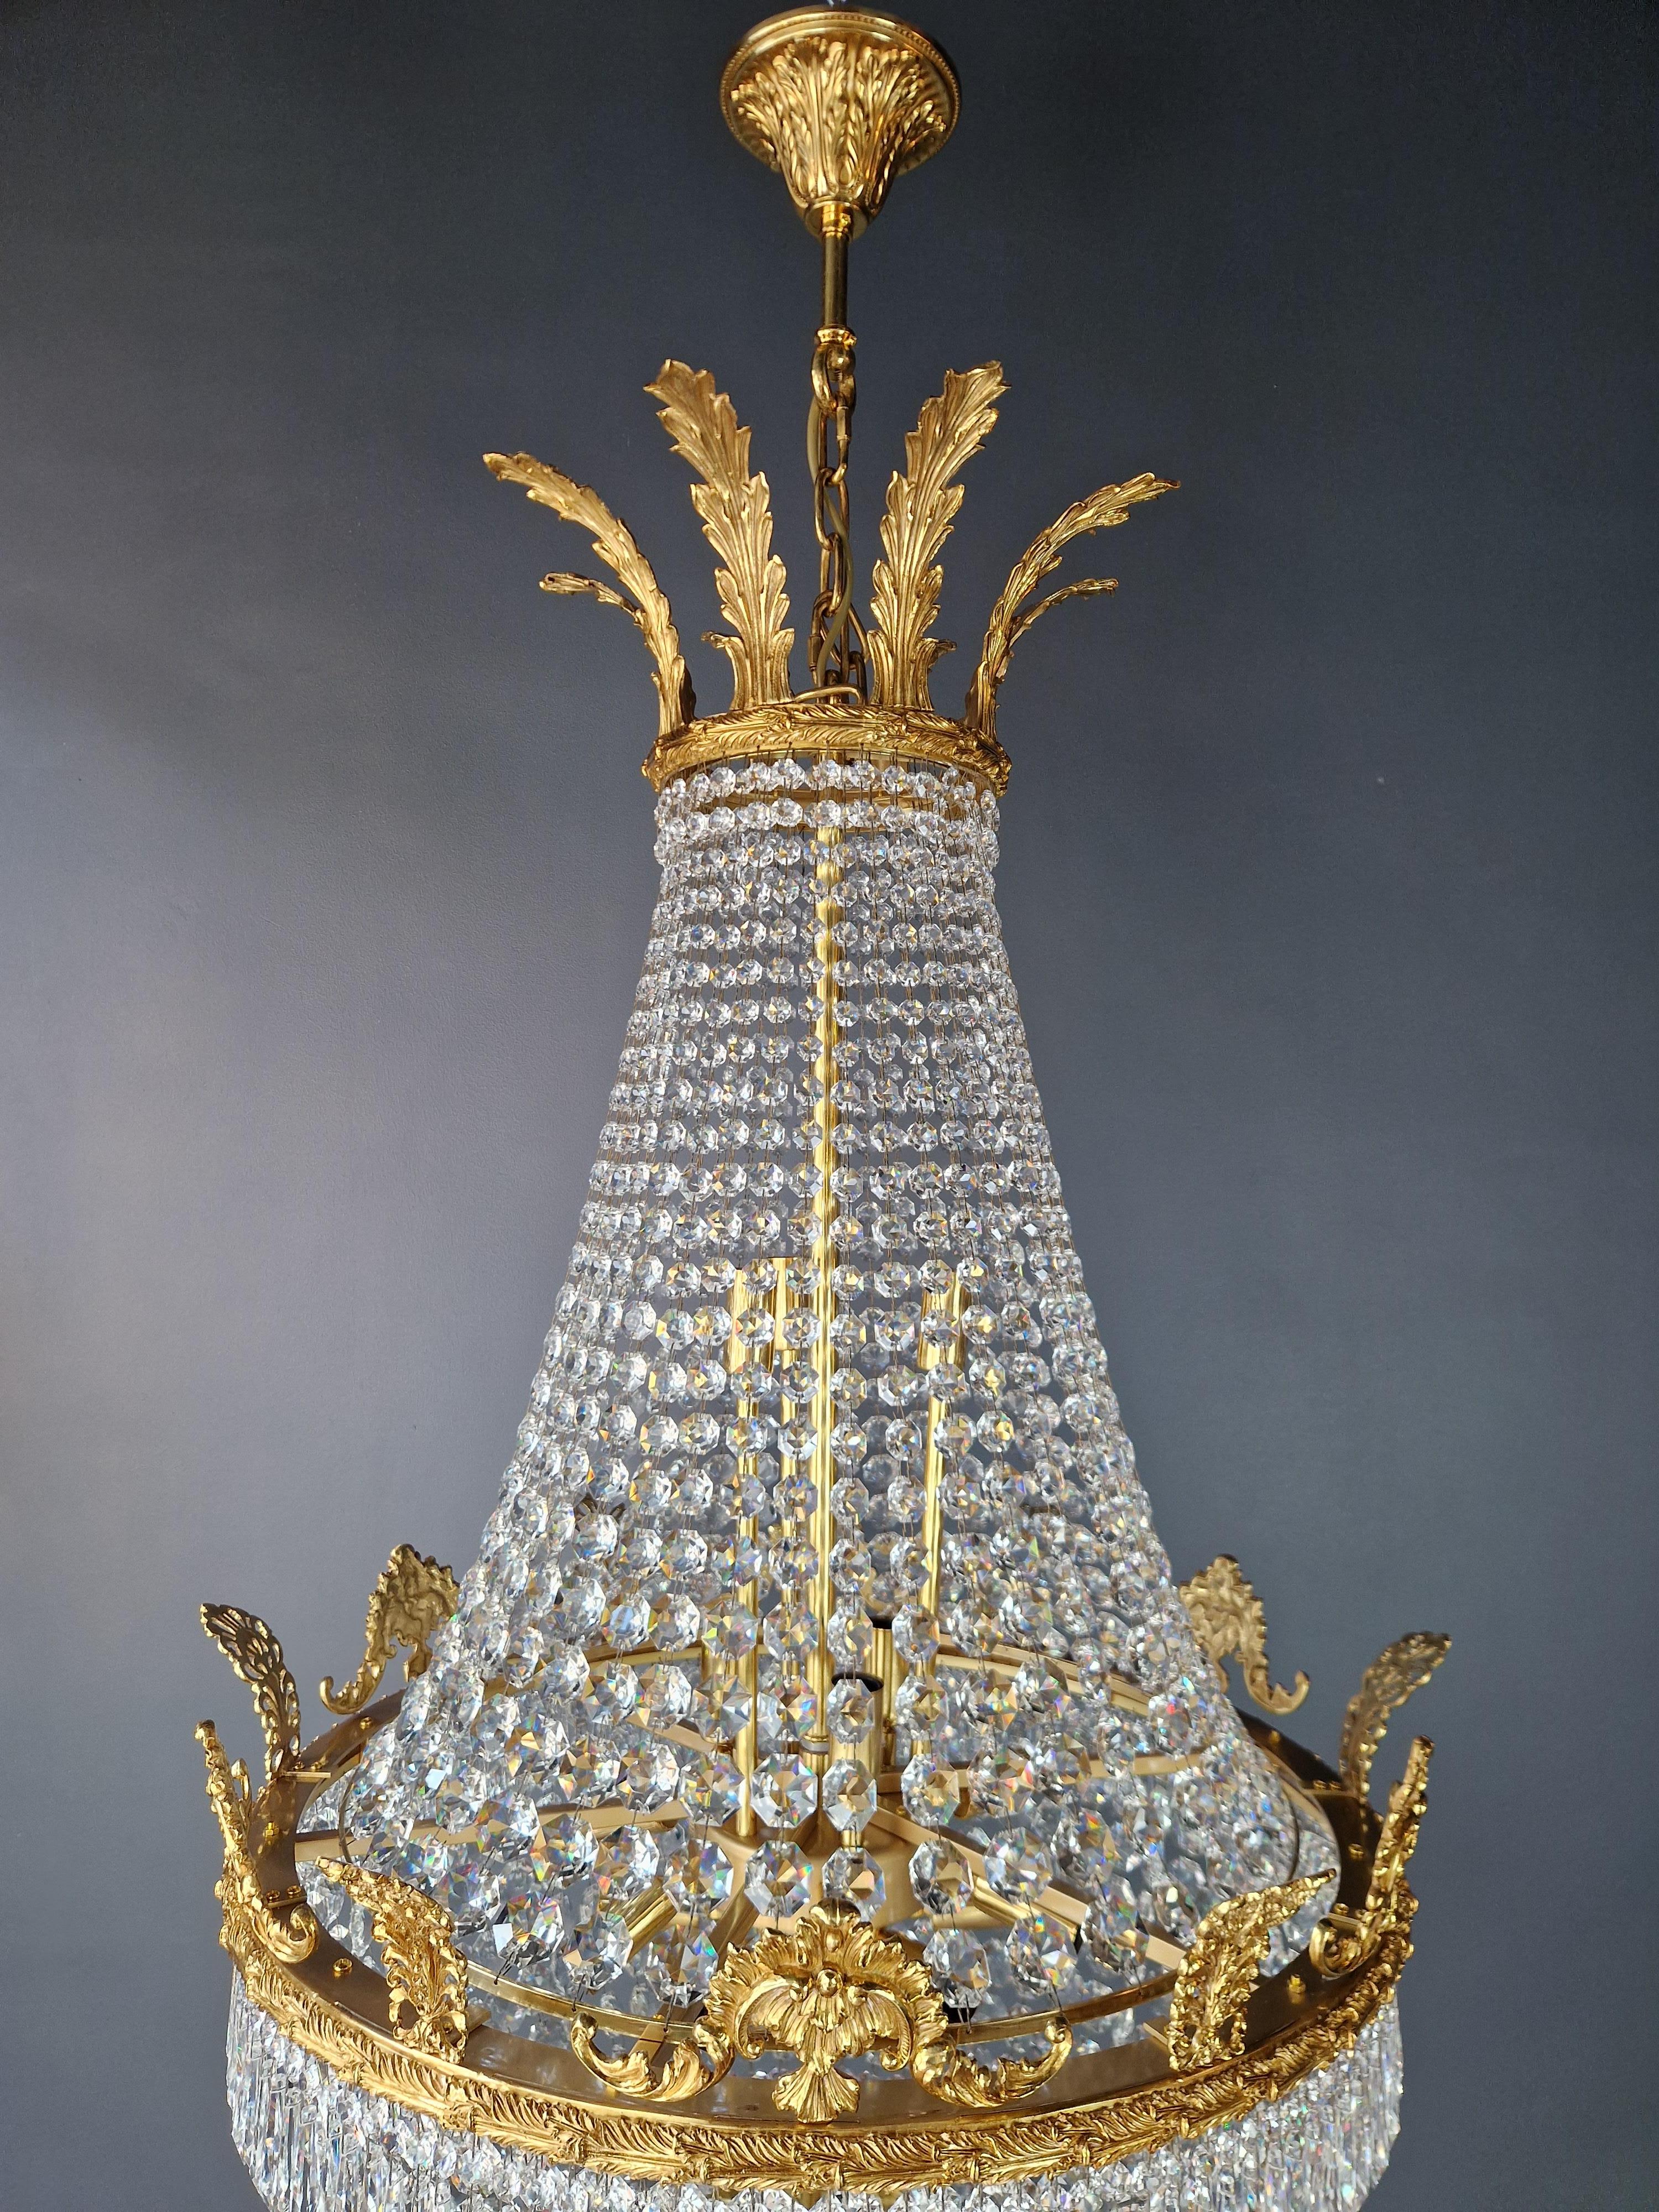 Brass Basket Empire Sac a Pearl Chandelier Crystal Lustre Lamp Antique Gold For Sale 6